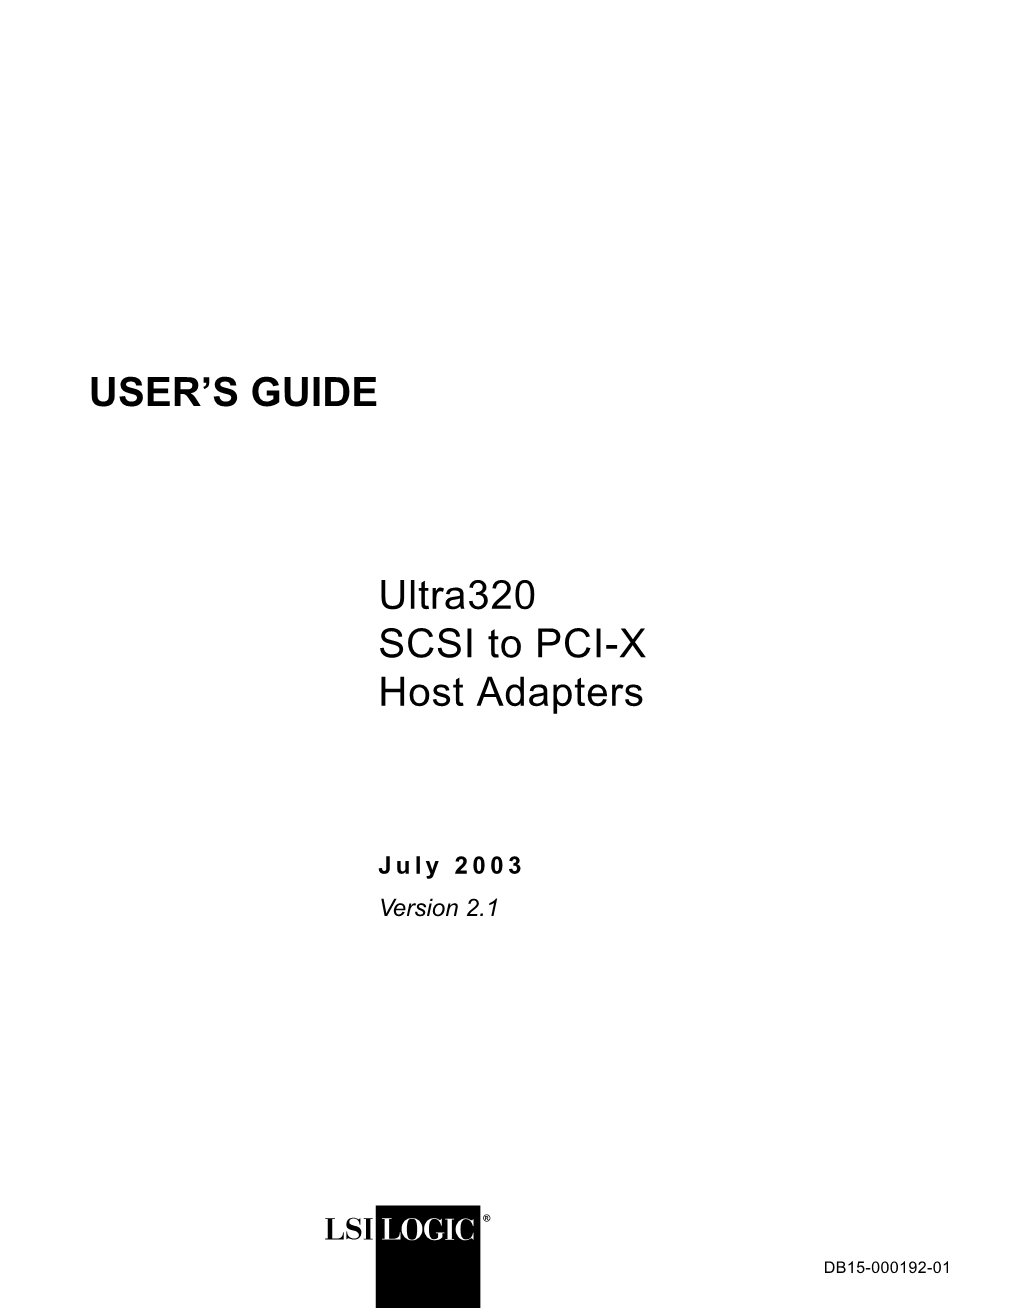 Ultra320 SCSI to PCI-X Host Adapters USER's GUIDE